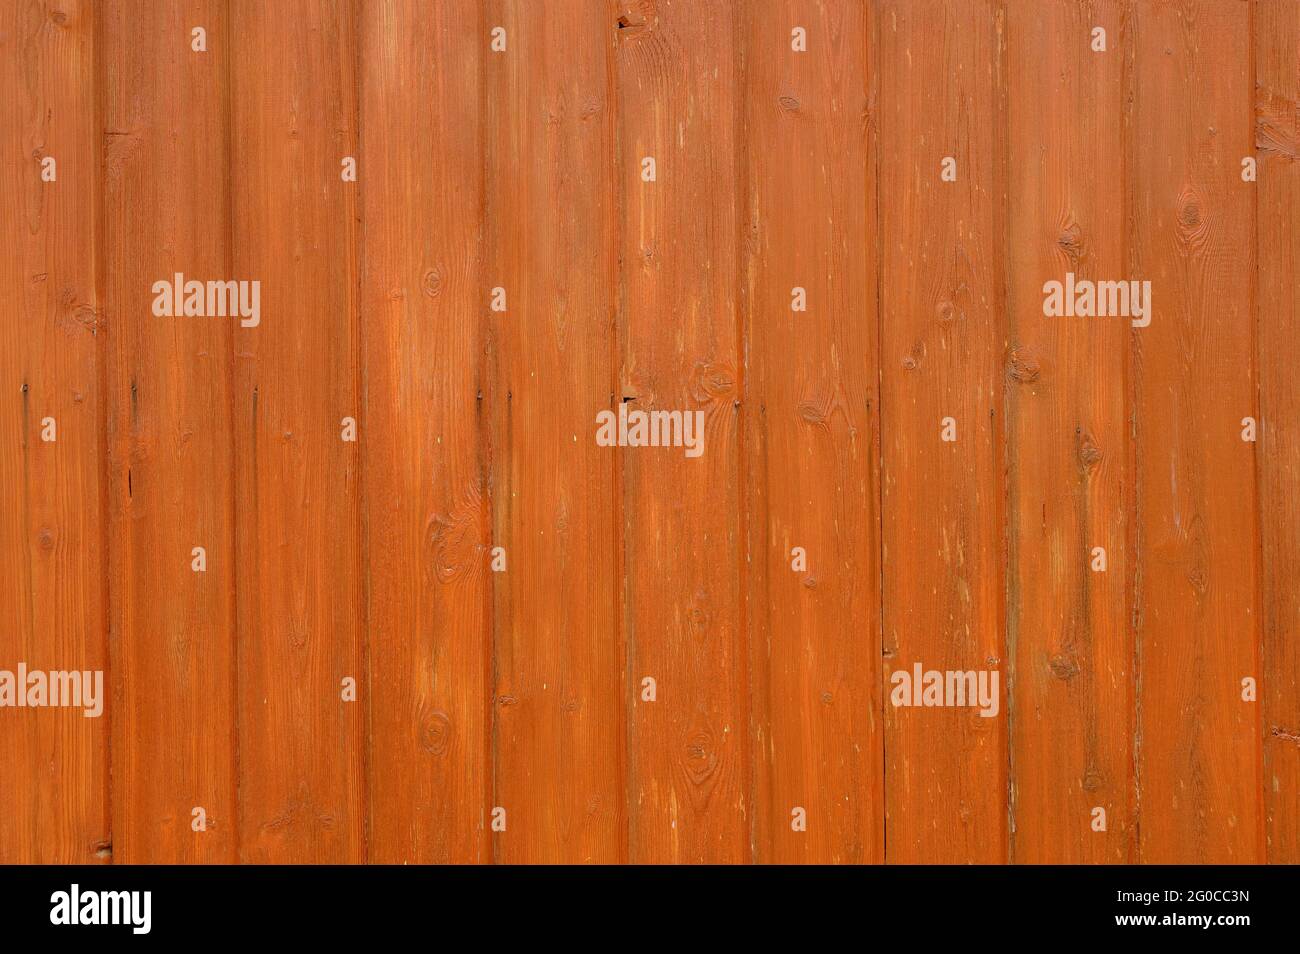 The surface is made of wooden boards with knots, painted in orange with a highlighted texture. Background textures. Stock Photo